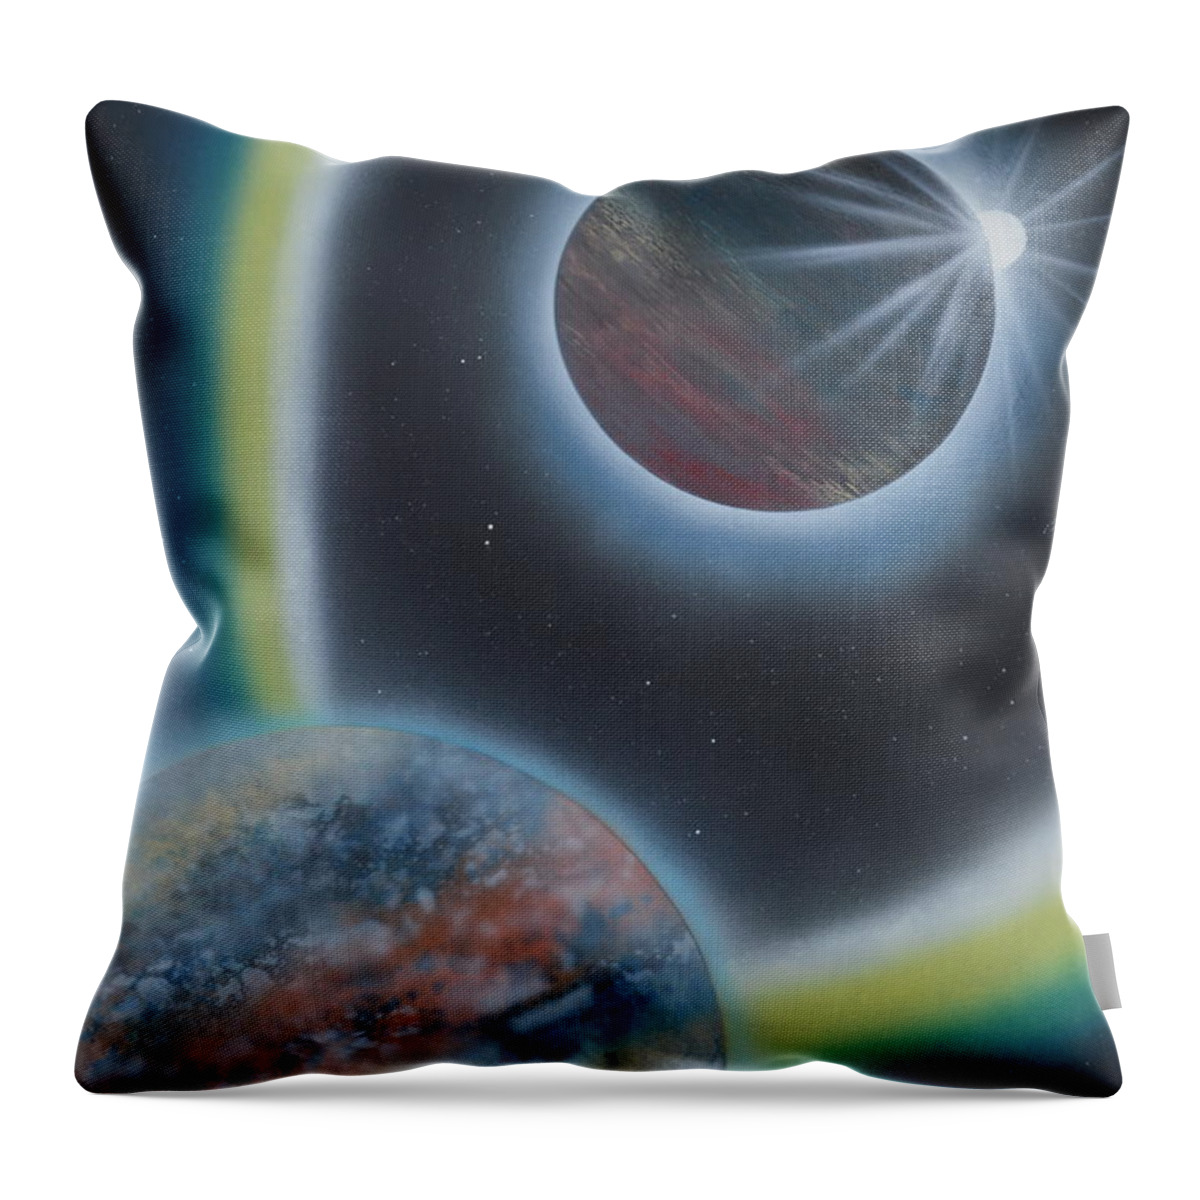  Throw Pillow featuring the painting Eclipsing by Mary Scott